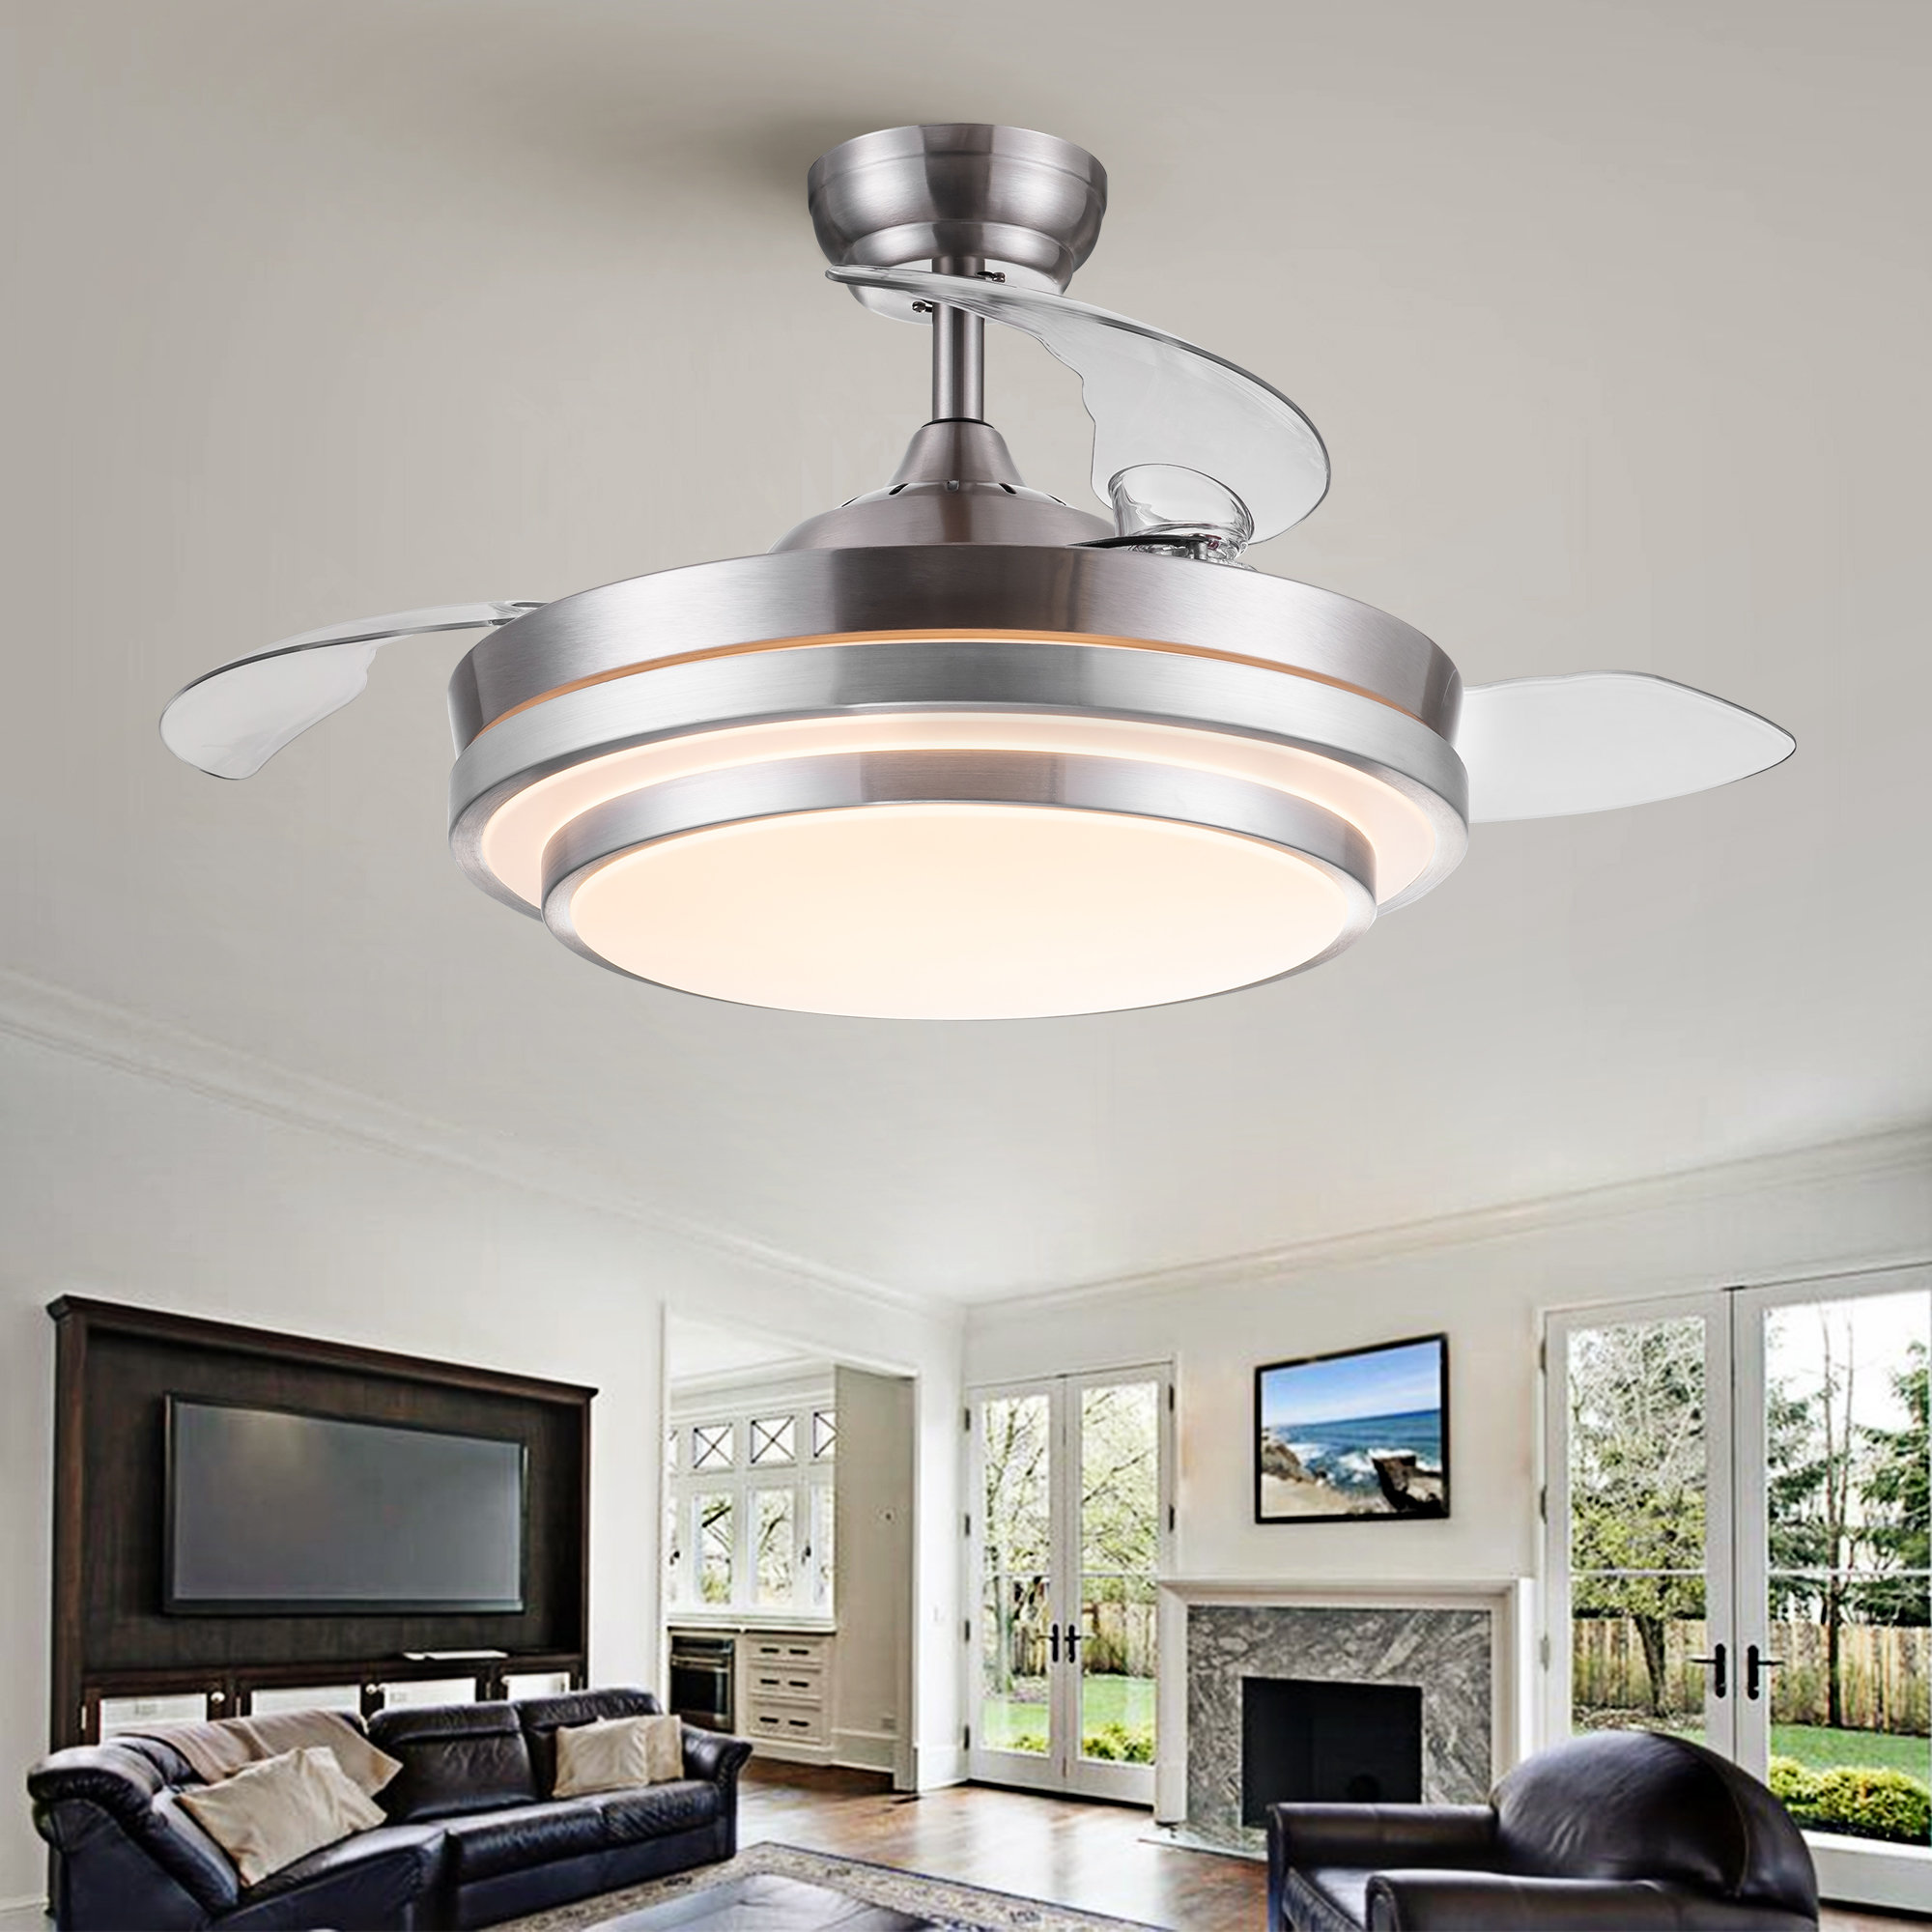 42 Edmund 3 - Blade Retractable Blades Ceiling Fan with Remote Control and Light Kit Included Etta Avenue